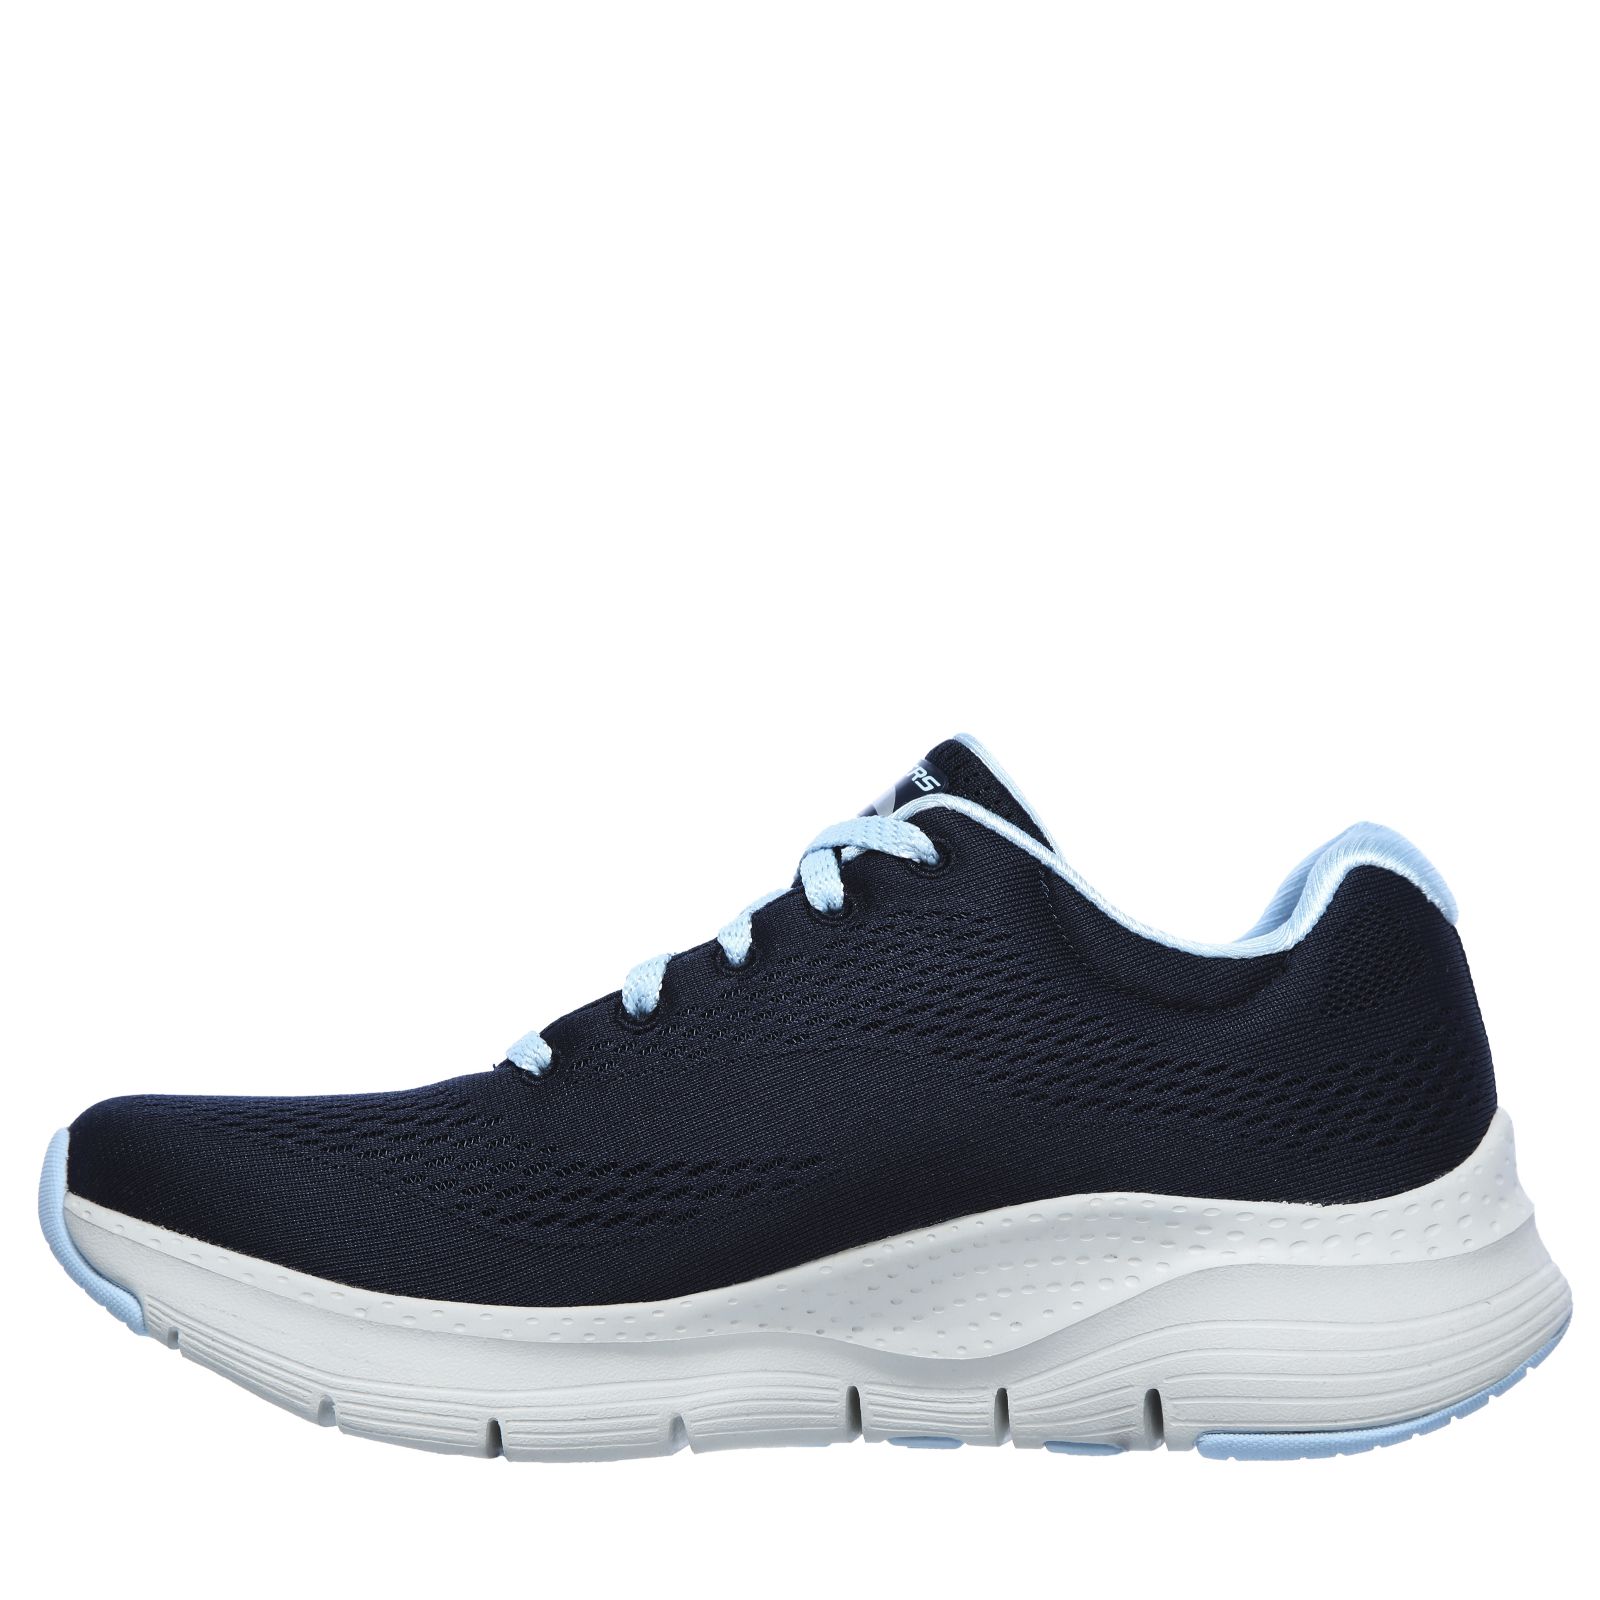 do skechers run large or small